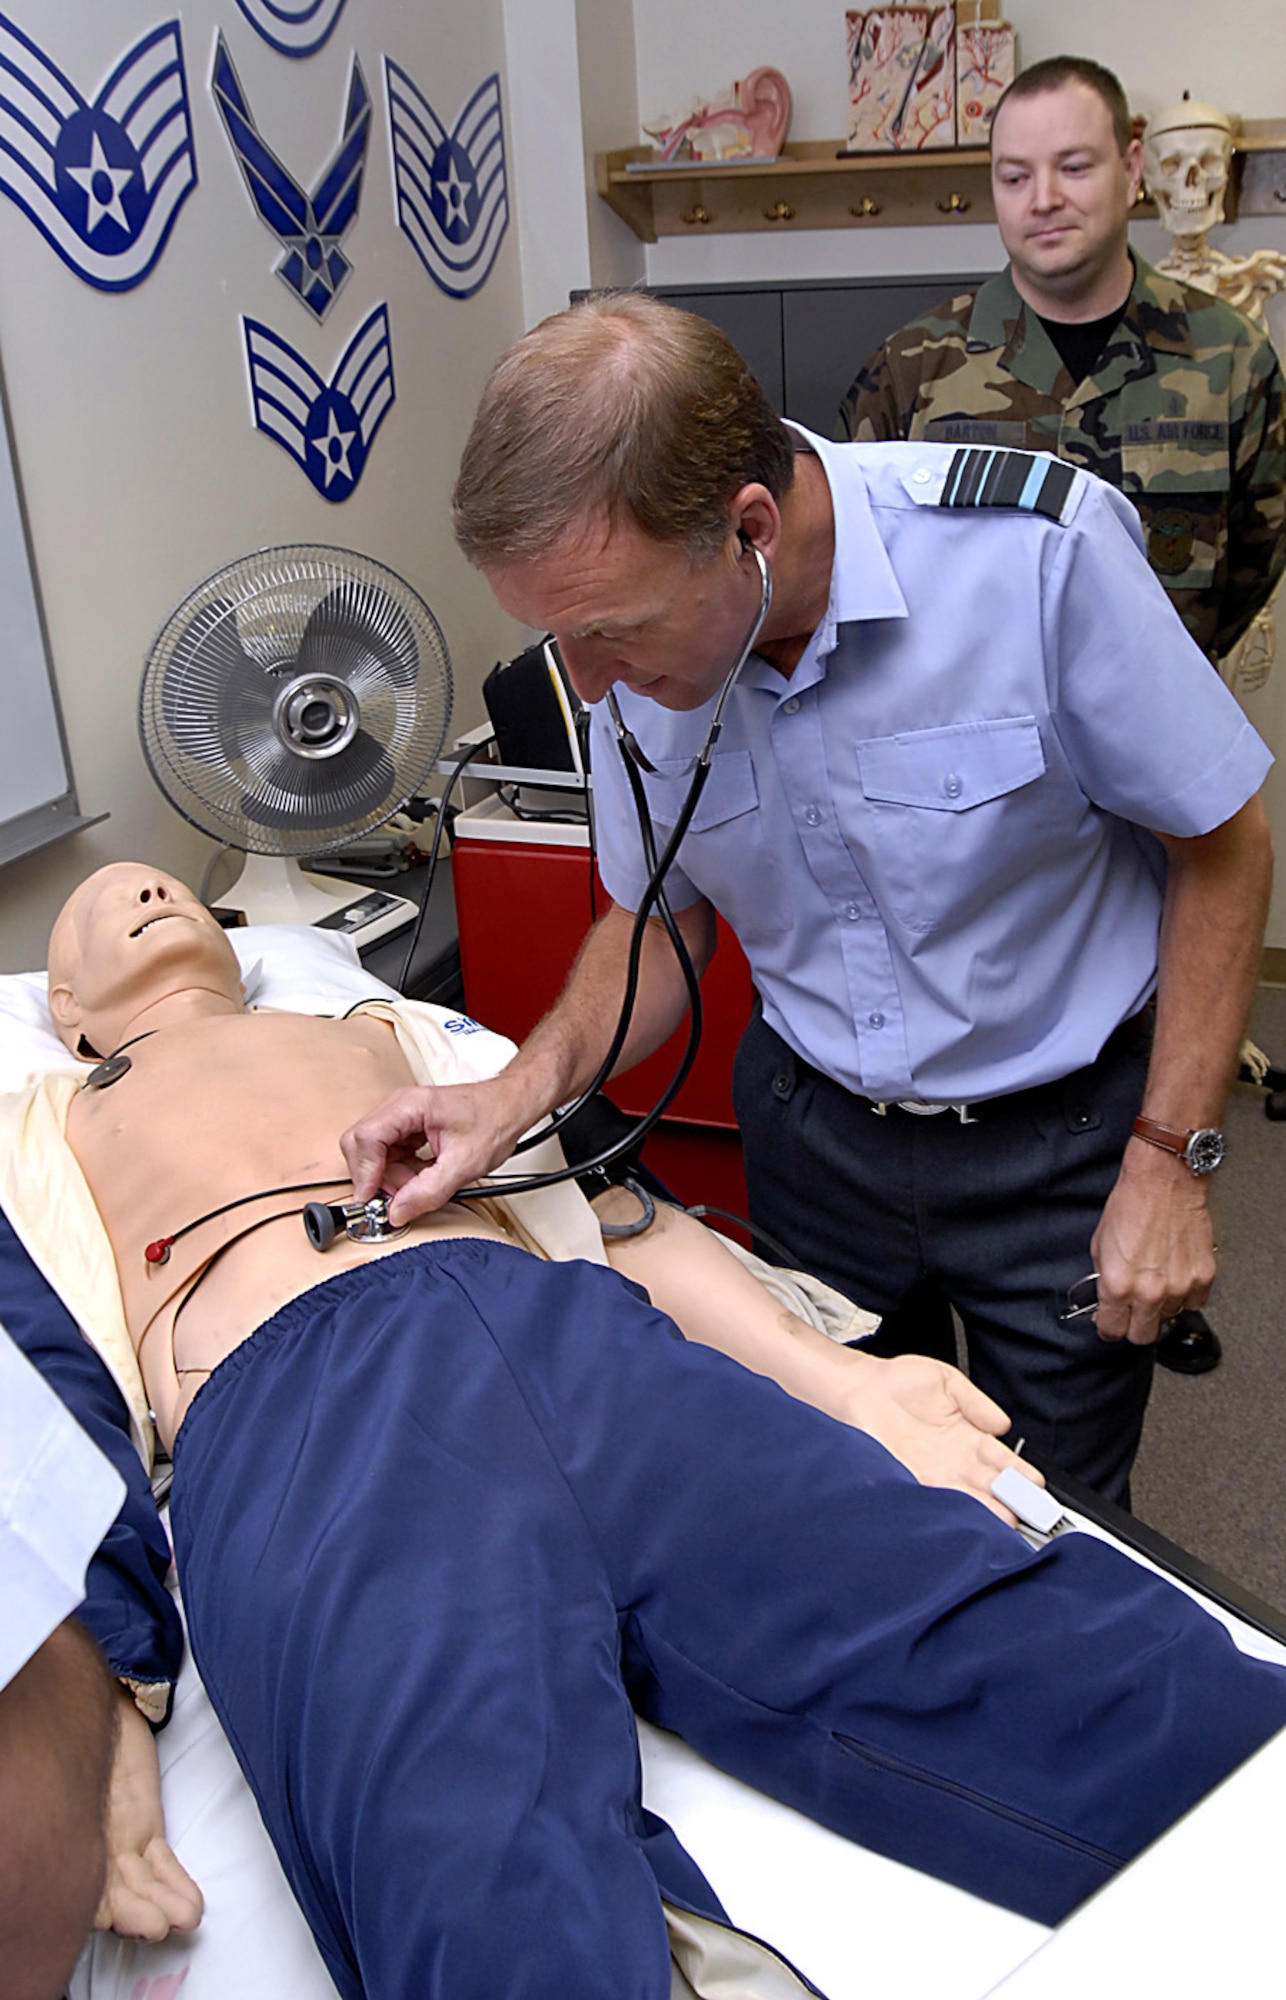 British Royal Air Force Air Marshal Barry Thornton, Commander in Chief of Personnel and Training Command, checks the vitals on a "patient" during his visit March 6 at Sheppard Air Force Base, Texas. Air Marshal Thornton spent the day at Sheppard visiting training locations across base. (U.S. Air Force photo/Harry Tonemah)